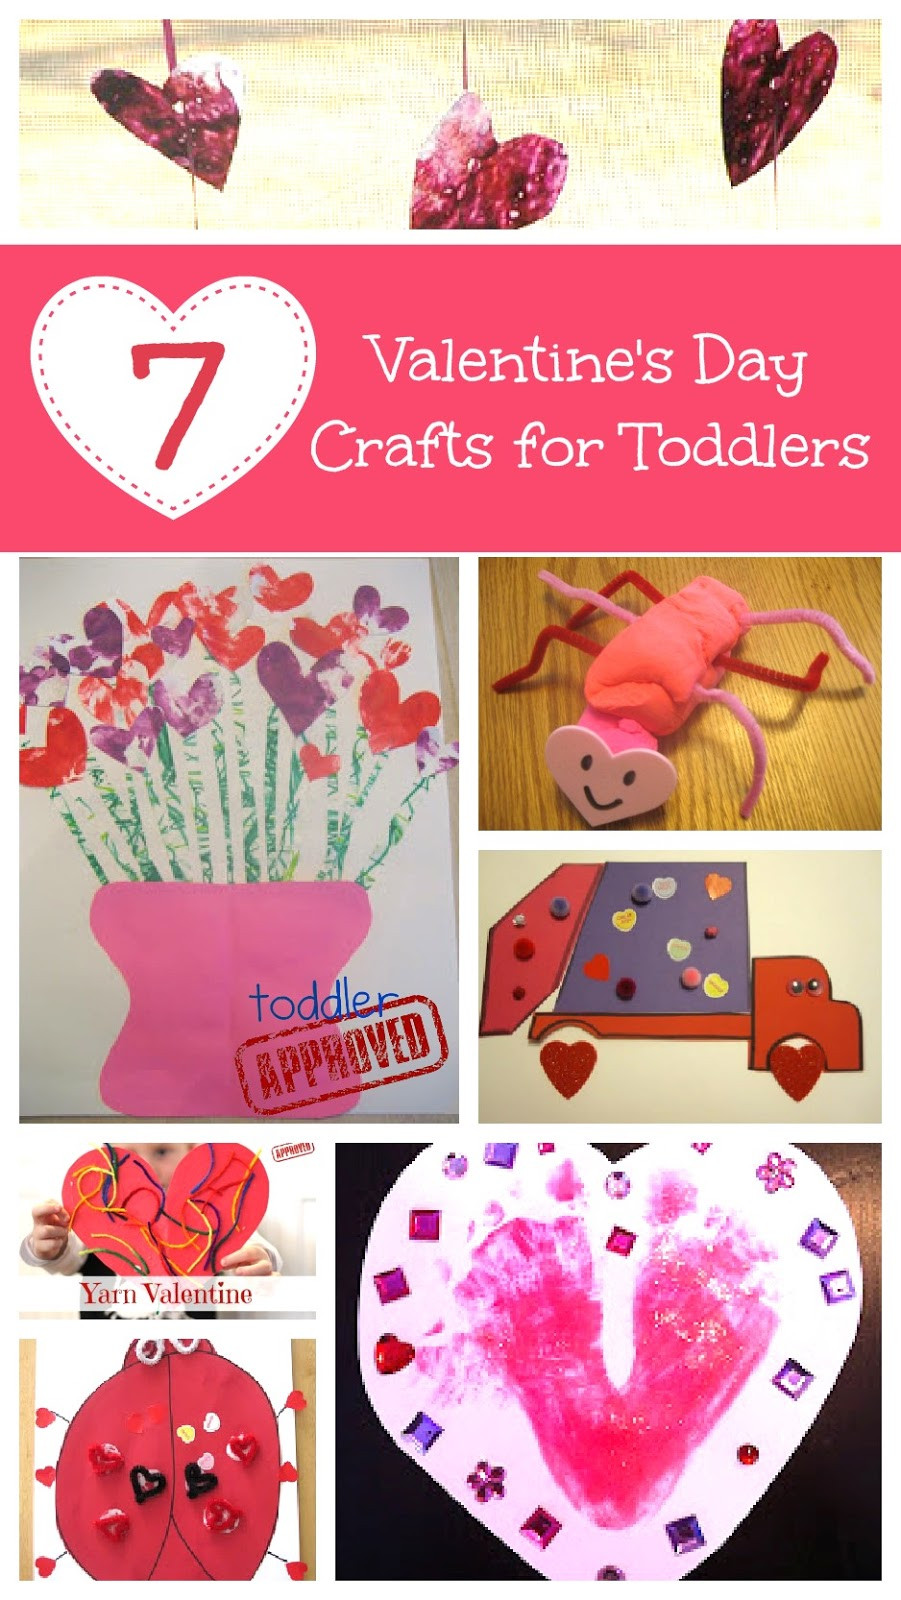 Valentines Day Ideas For Preschoolers
 Toddler Approved 7 Valentine s Day Crafts for Toddlers